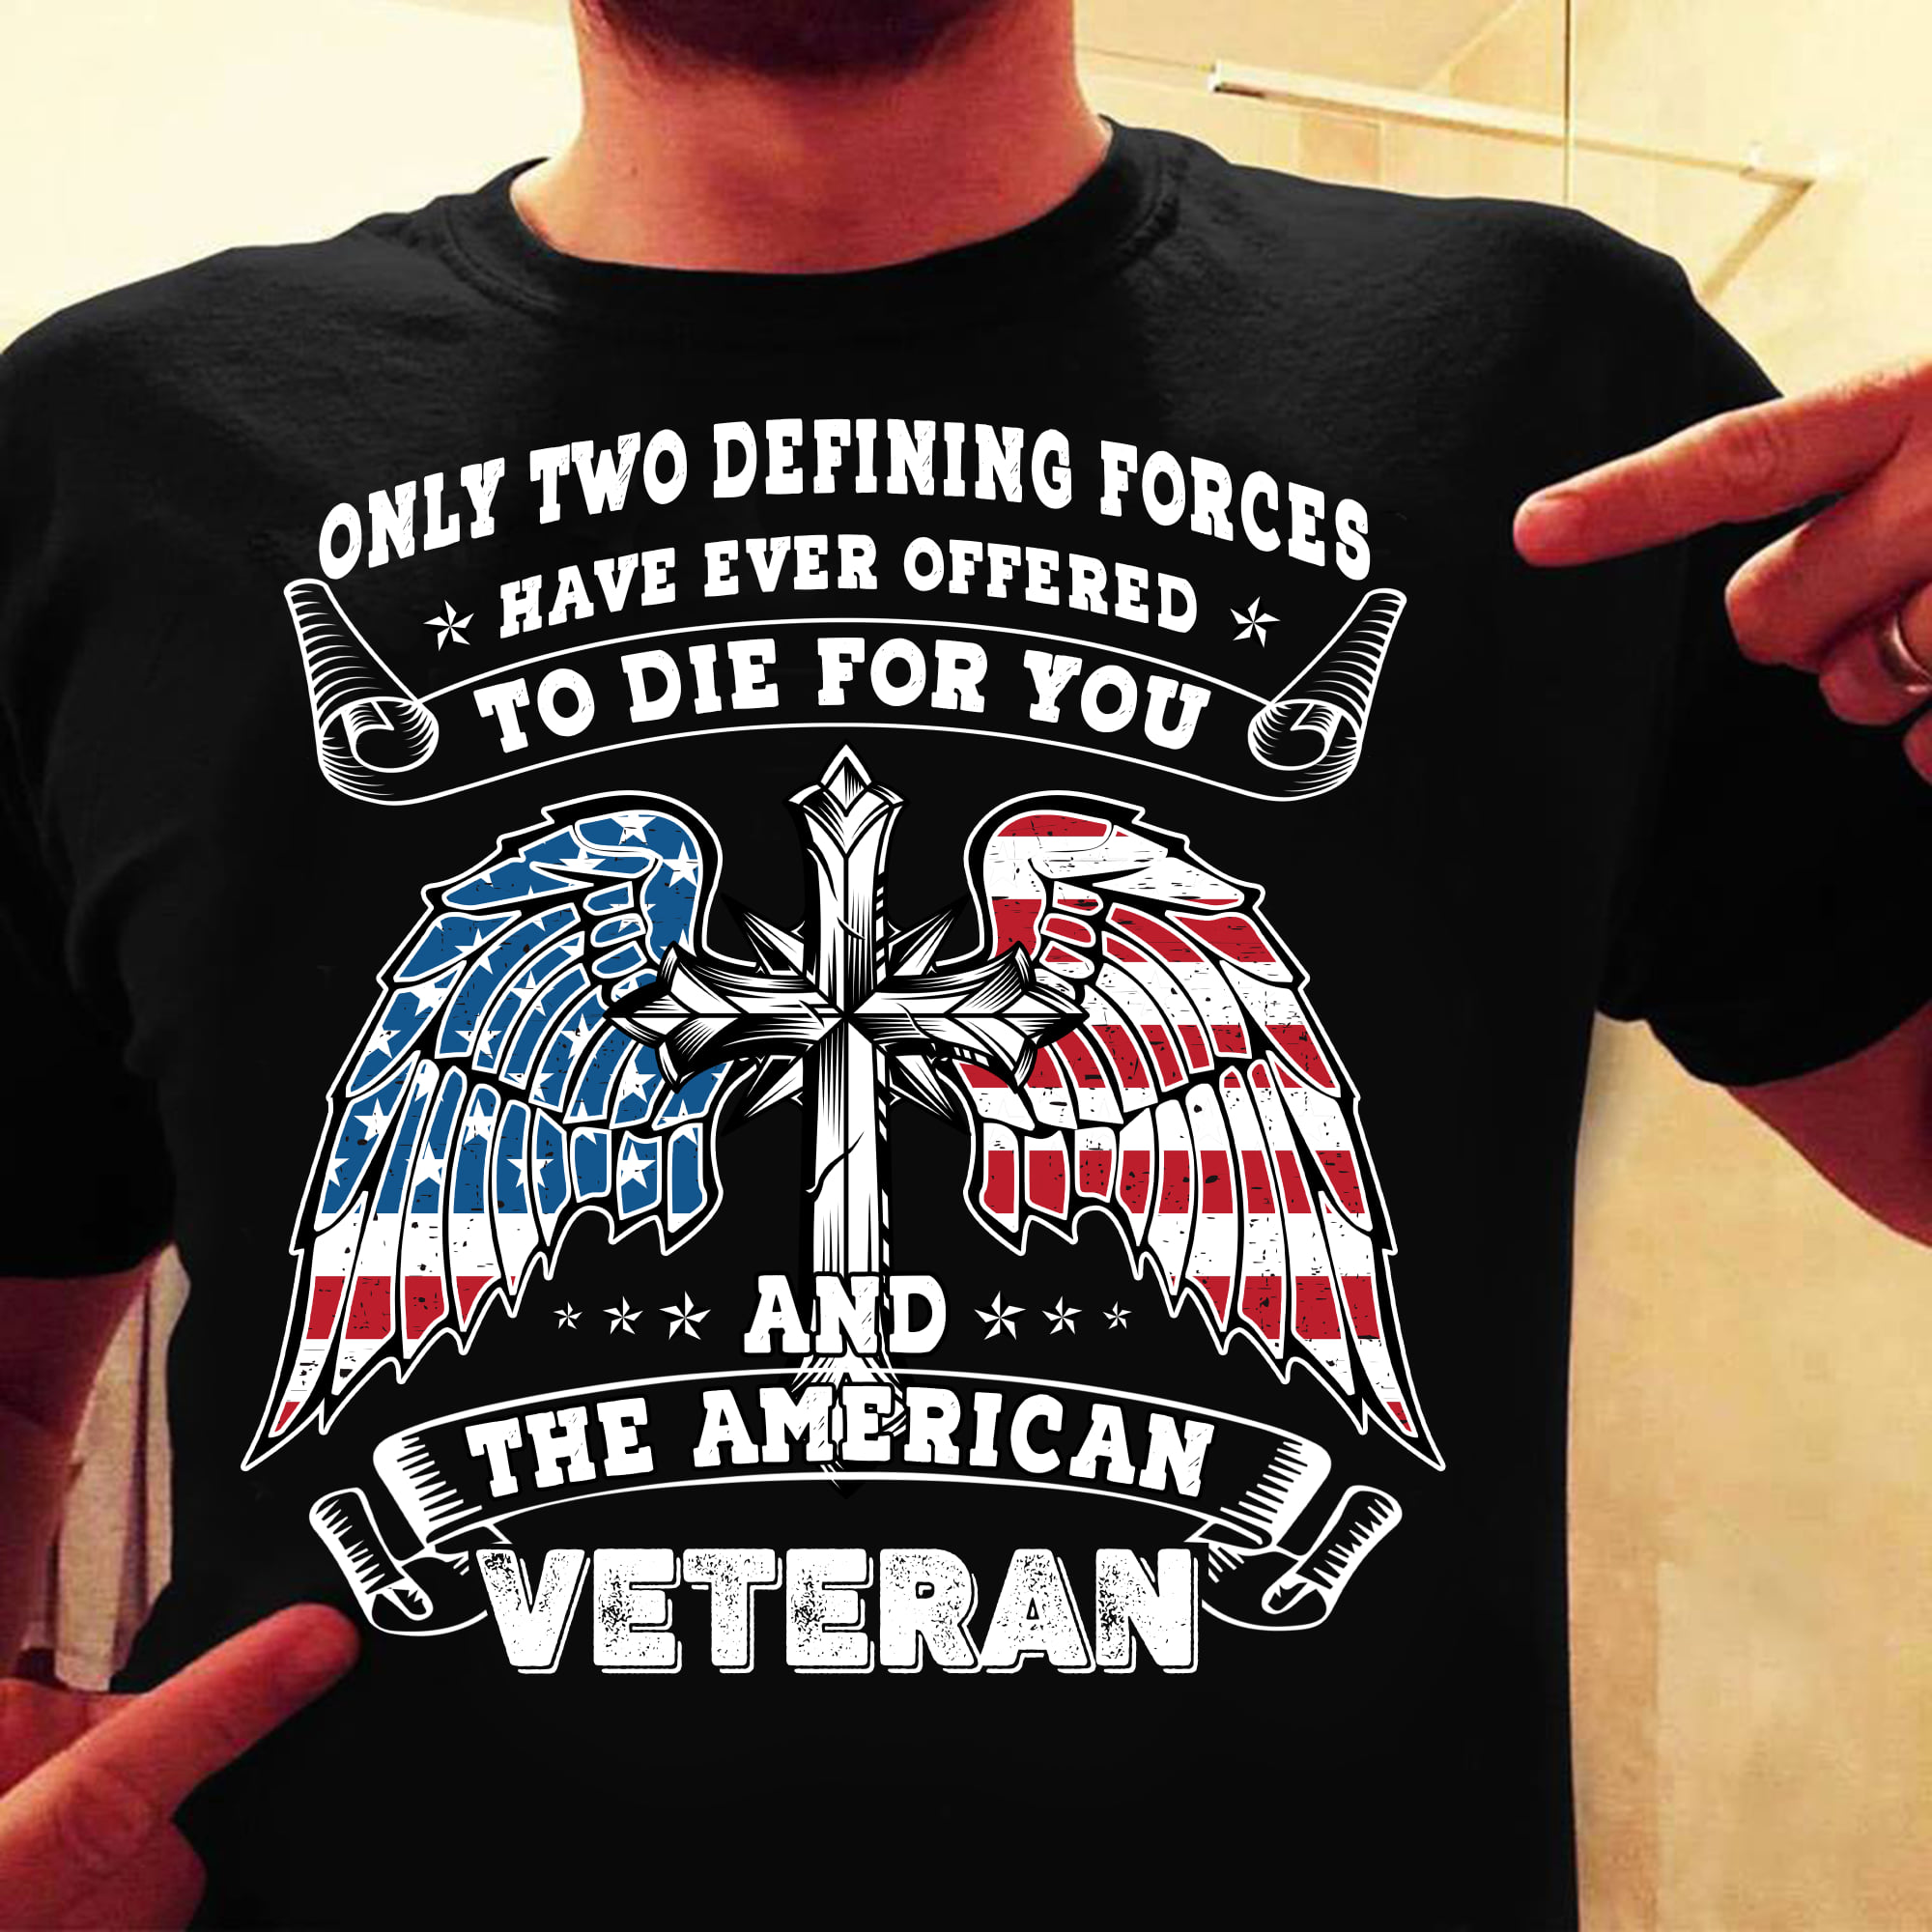 Only two defining forces have ever offered to die for you and the American veteran